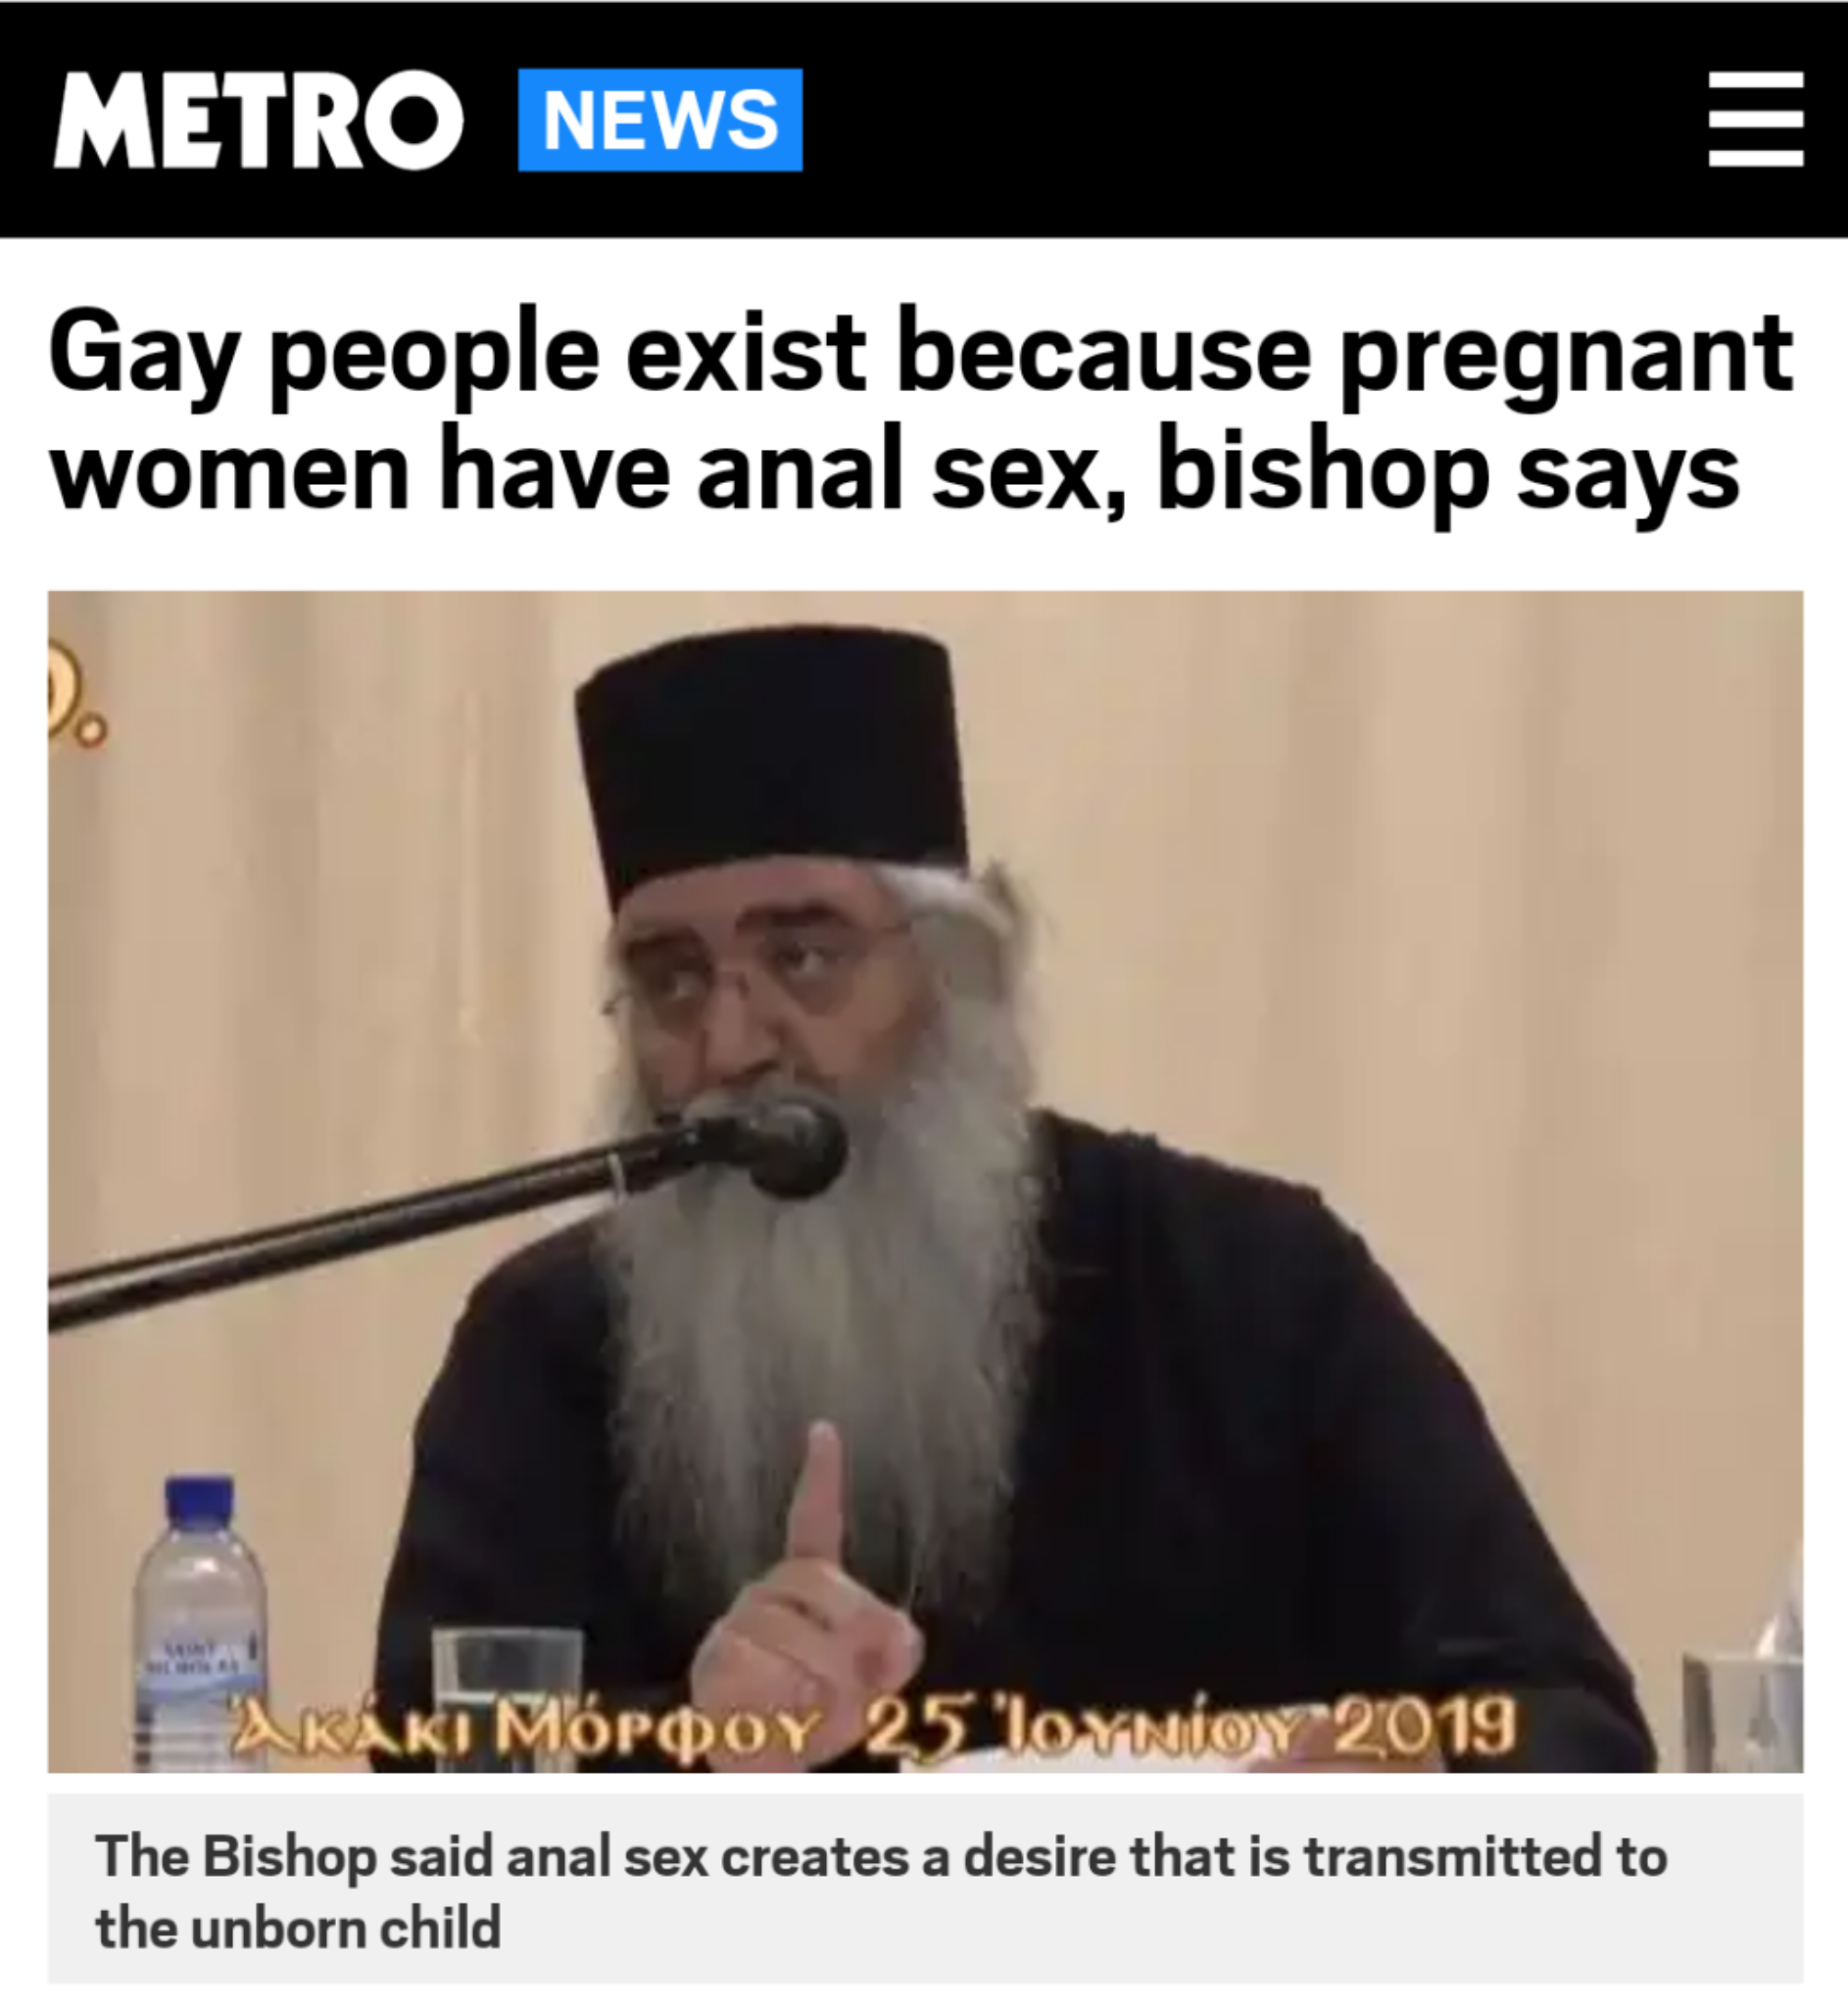 metro - Metro News Gay people exist because pregnant women have anal sex, bishop says Kakt Mpqoy 25 loynior 2019 The Bishop said anal sex creates a desire that is transmitted to the unborn child